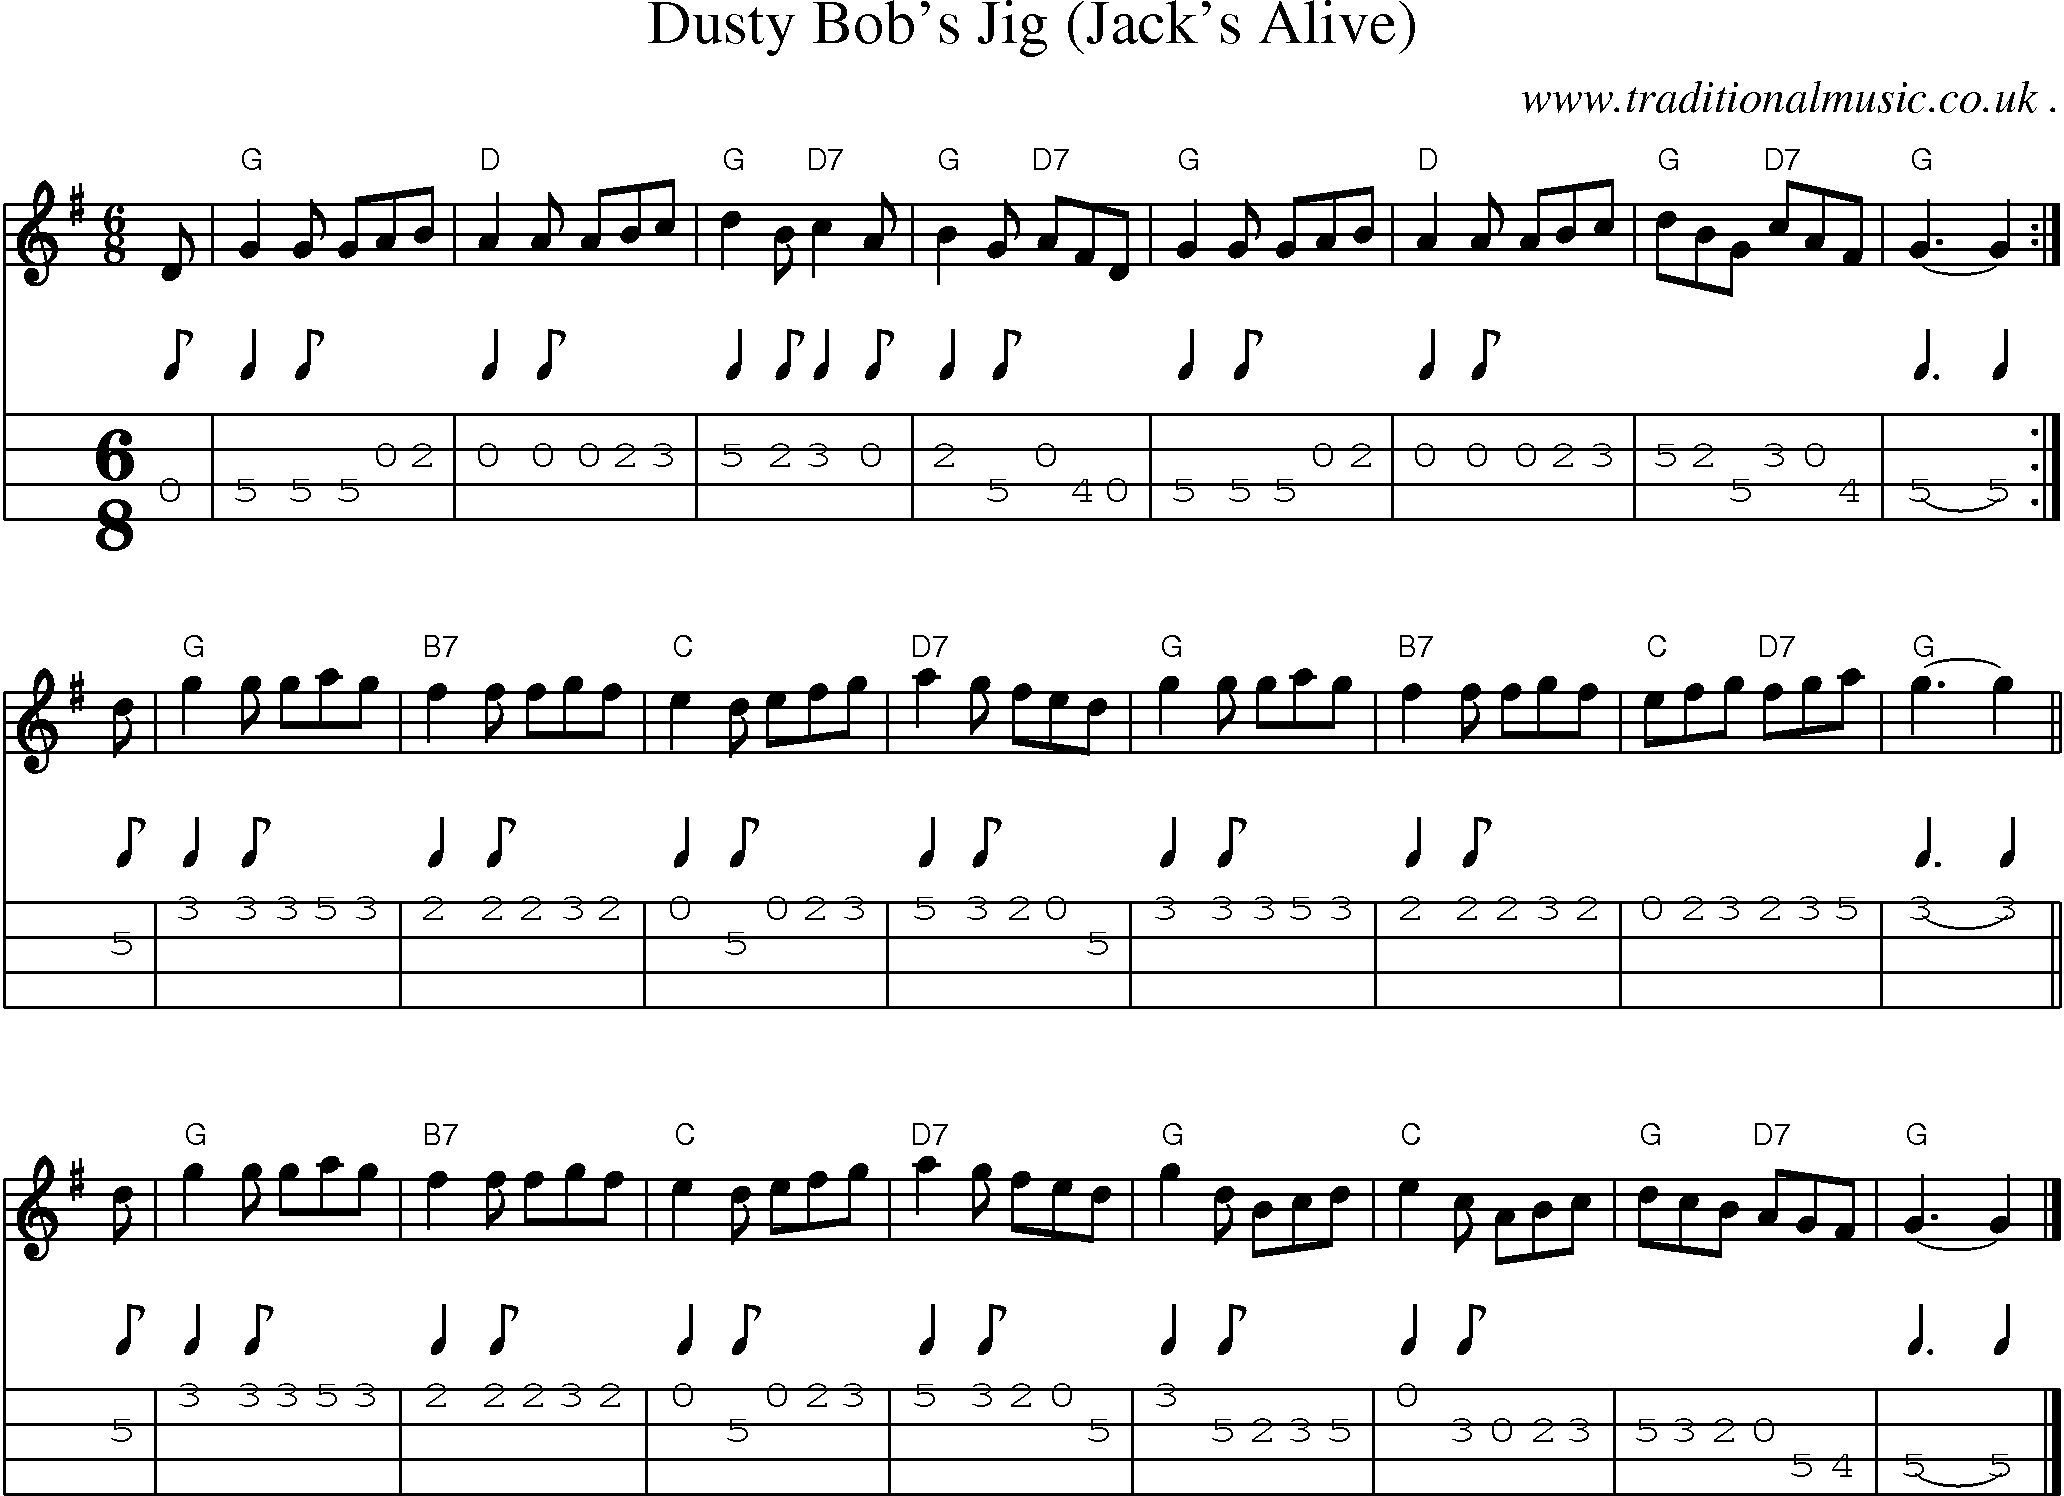 Sheet-music  score, Chords and Mandolin Tabs for Dusty Bobs Jig Jacks Alive